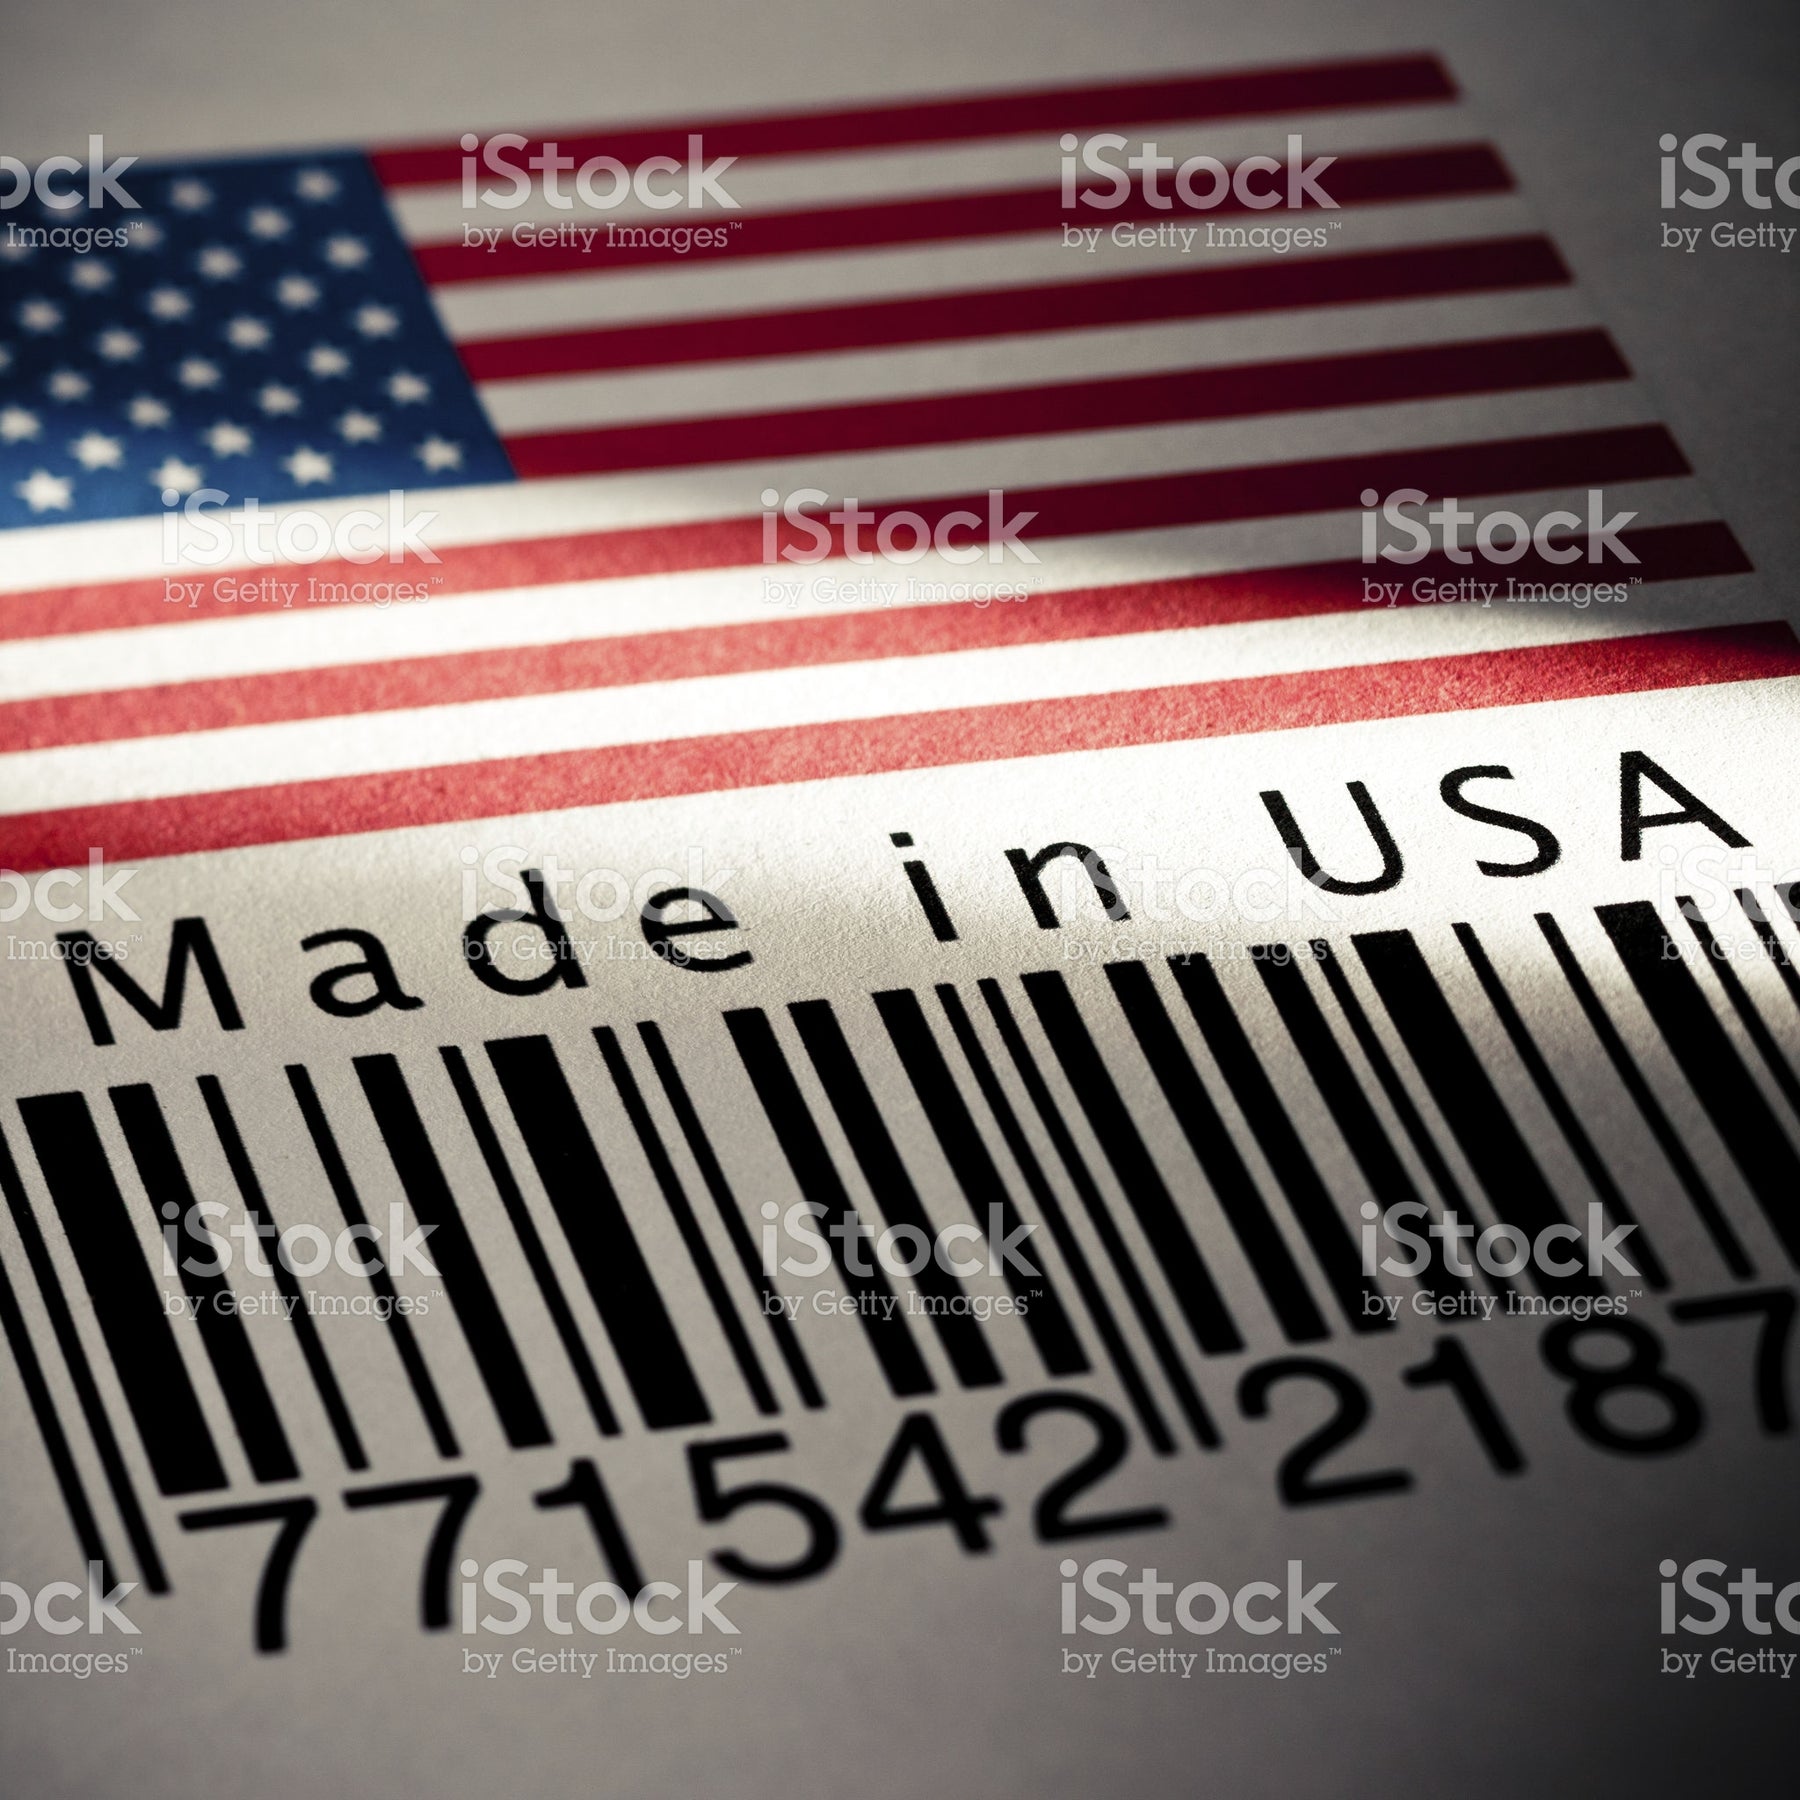 How to Know if an American Flag is Made in the USA